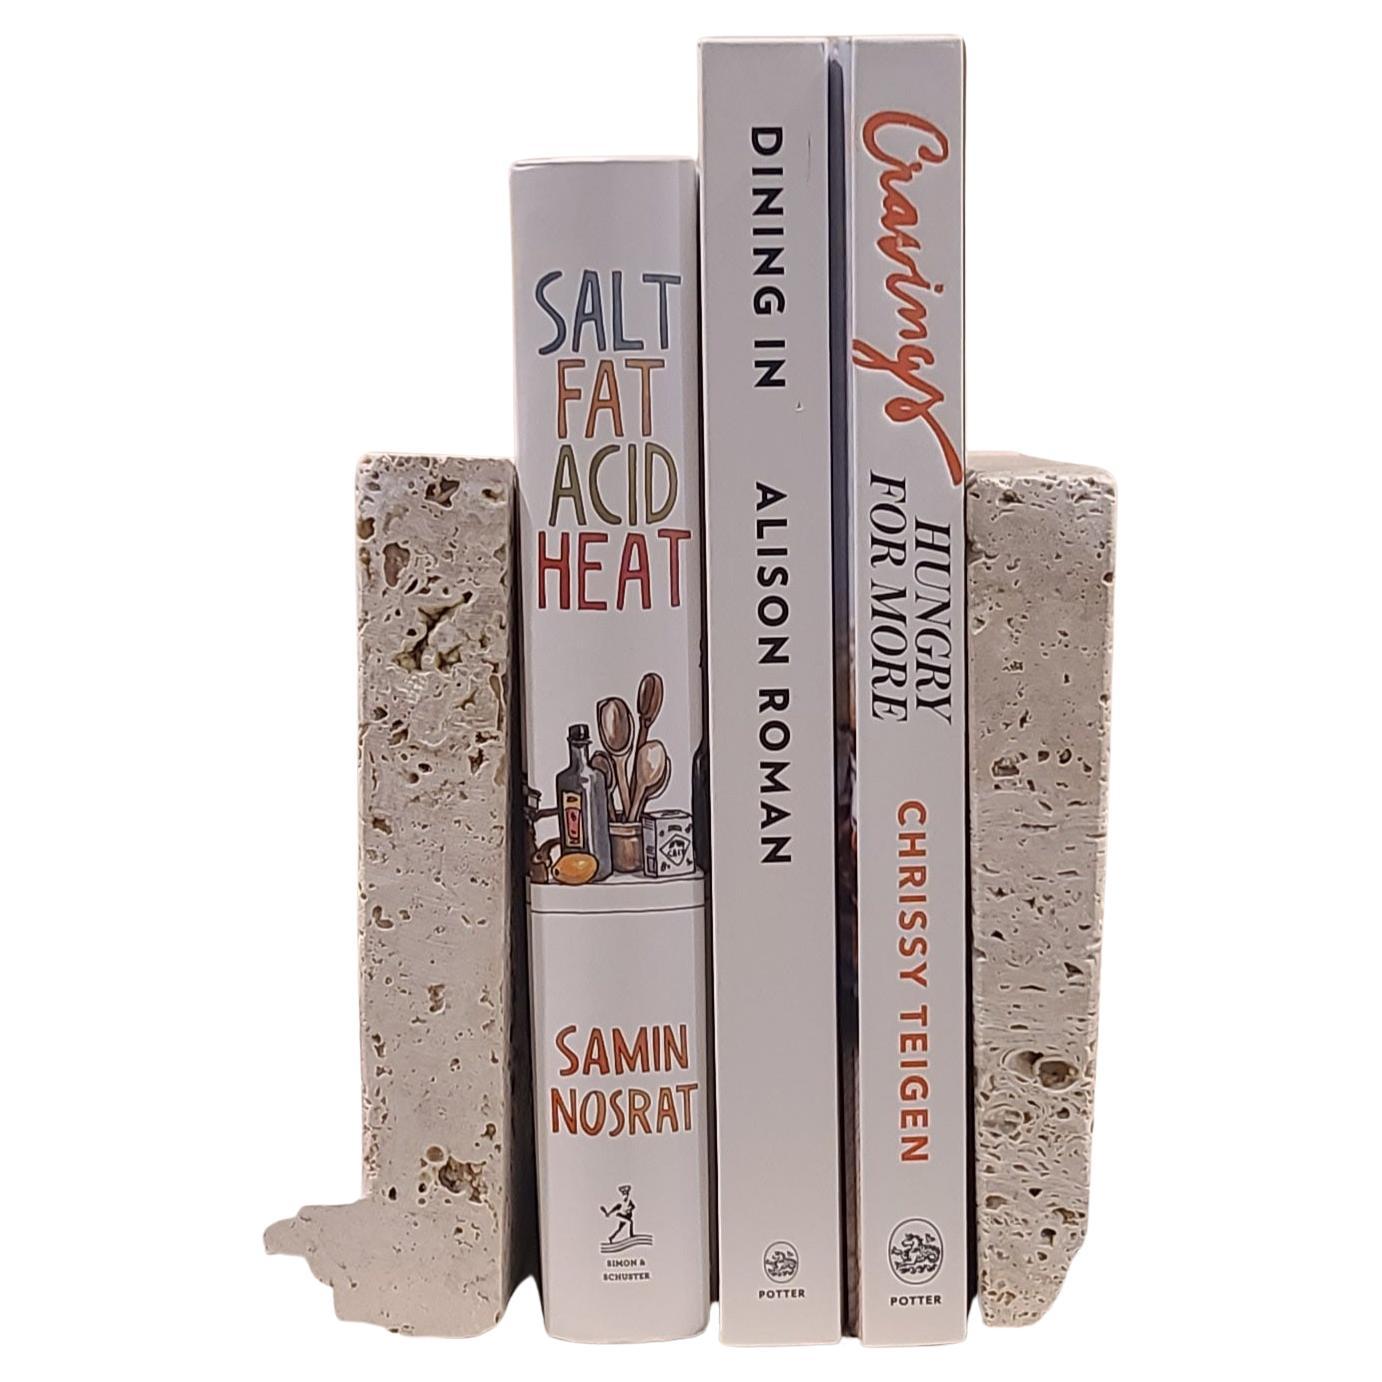 Travertine bookends are elegant and functional accessories for organizing and displaying books. Crafted from natural travertine stone, these bookends often feature unique patterns and earthy tones, adding a touch of sophistication to any bookshelf